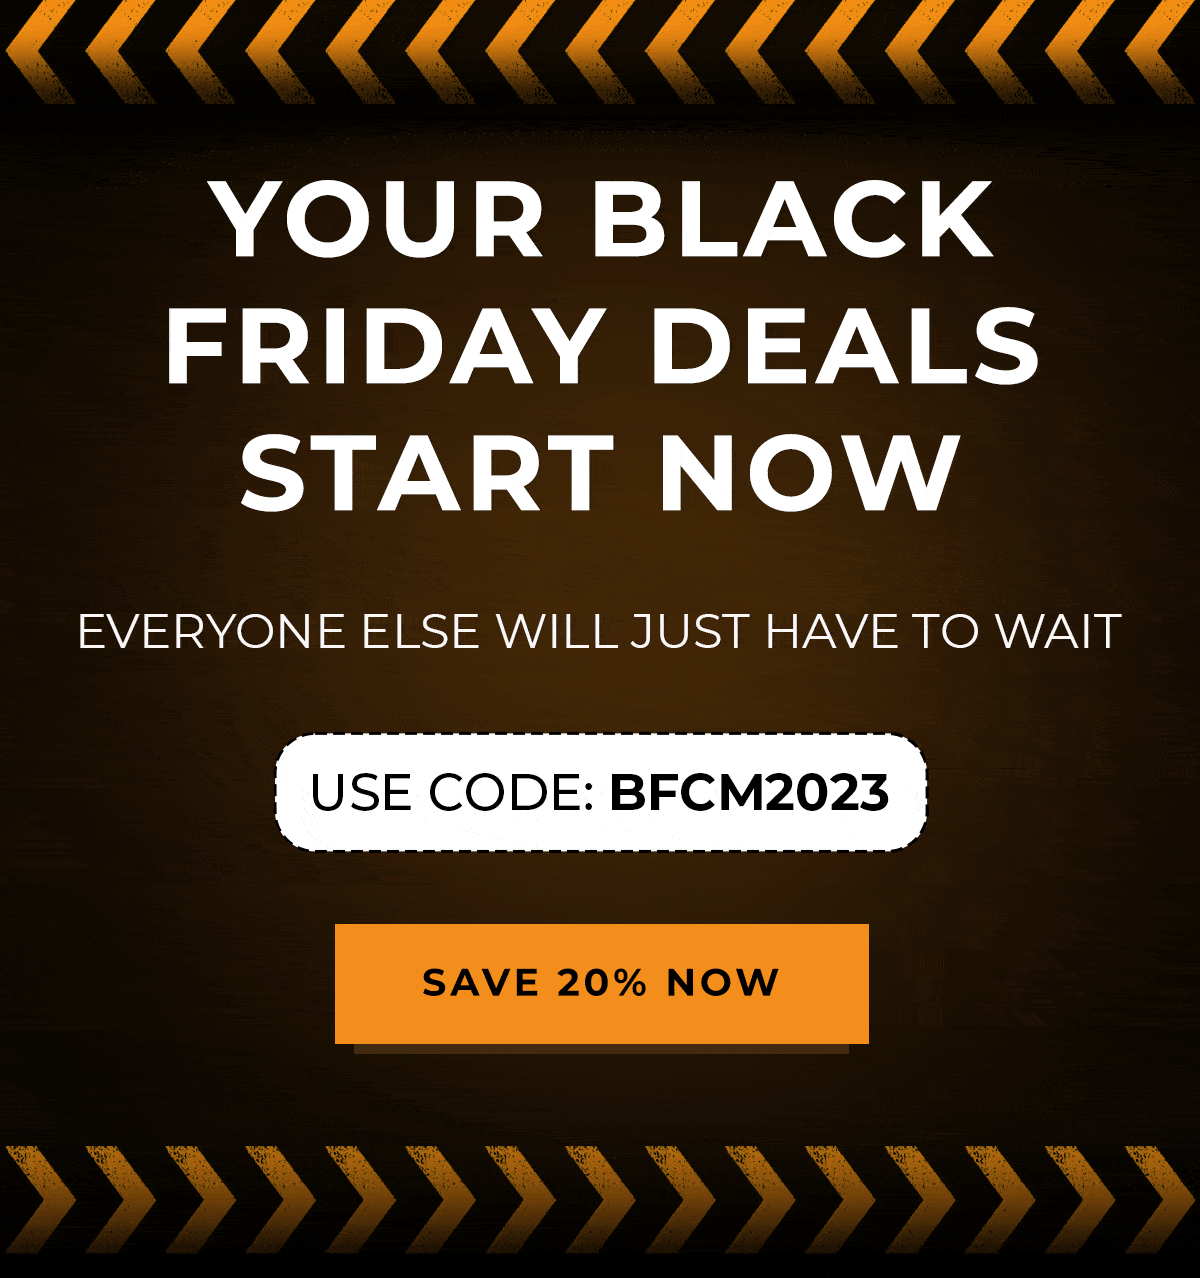 Your Black Friday Deals Start Now